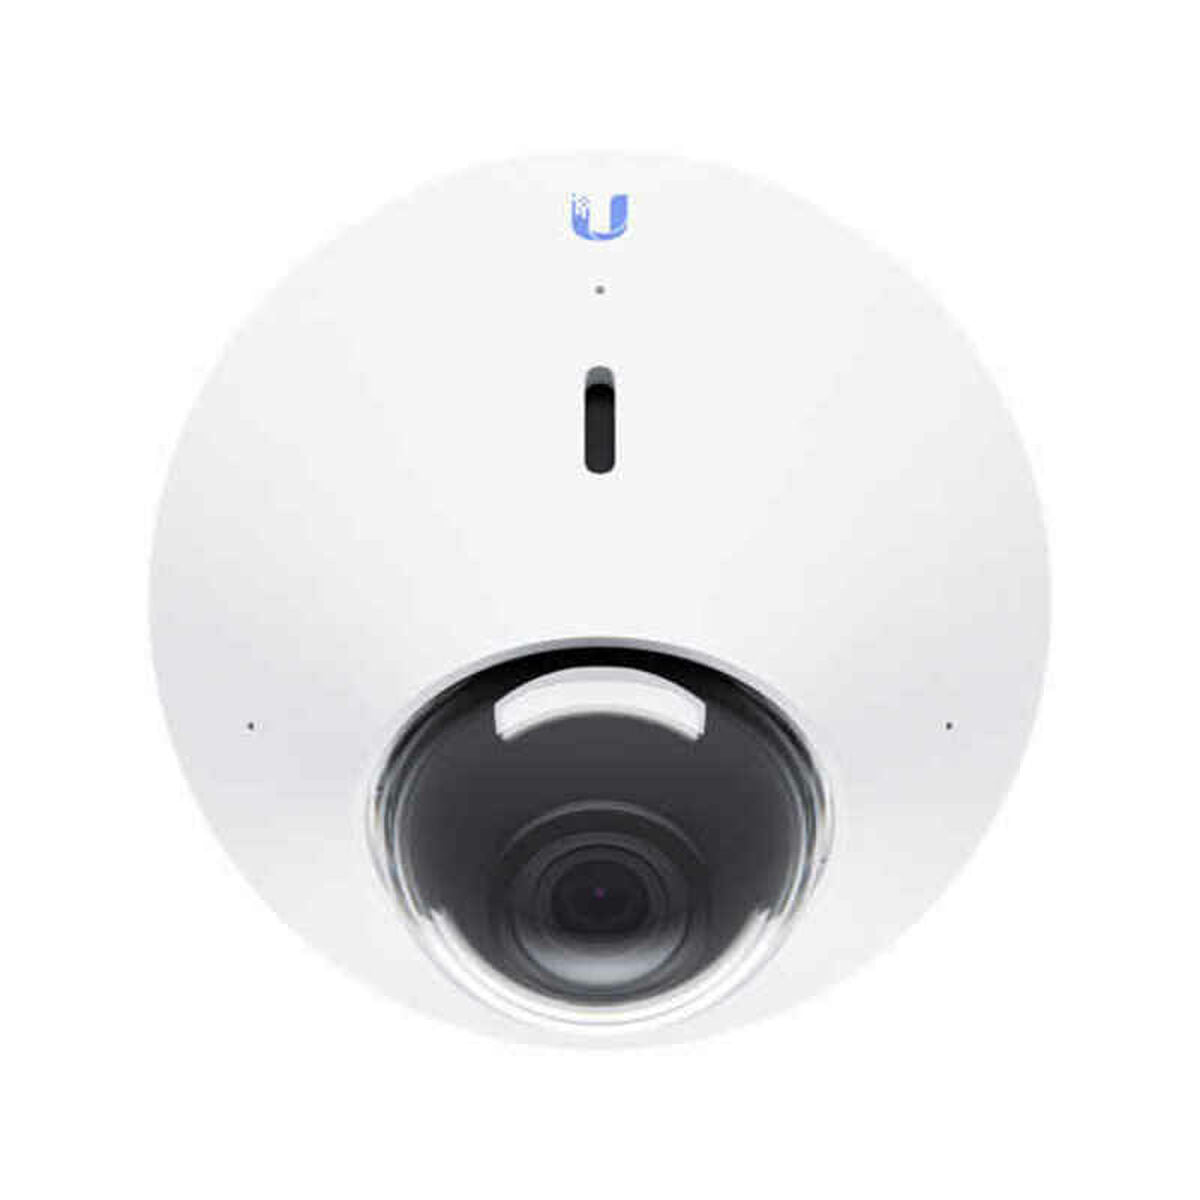 IP camera UBIQUITI UVC-G4-DOME 2688 x 1512 px White, UBIQUITI, DIY and tools, Prevention and safety, ip-camera-ubiquiti-uvc-g4-dome-2688-x-1512-px-white-1, Brand_UBIQUITI, category-reference-2399, category-reference-2471, category-reference-3209, category-reference-t-15436, category-reference-t-15495, category-reference-t-19651, category-reference-t-21086, category-reference-t-25211, Condition_NEW, ferretería, Price_200 - 300, RiotNook